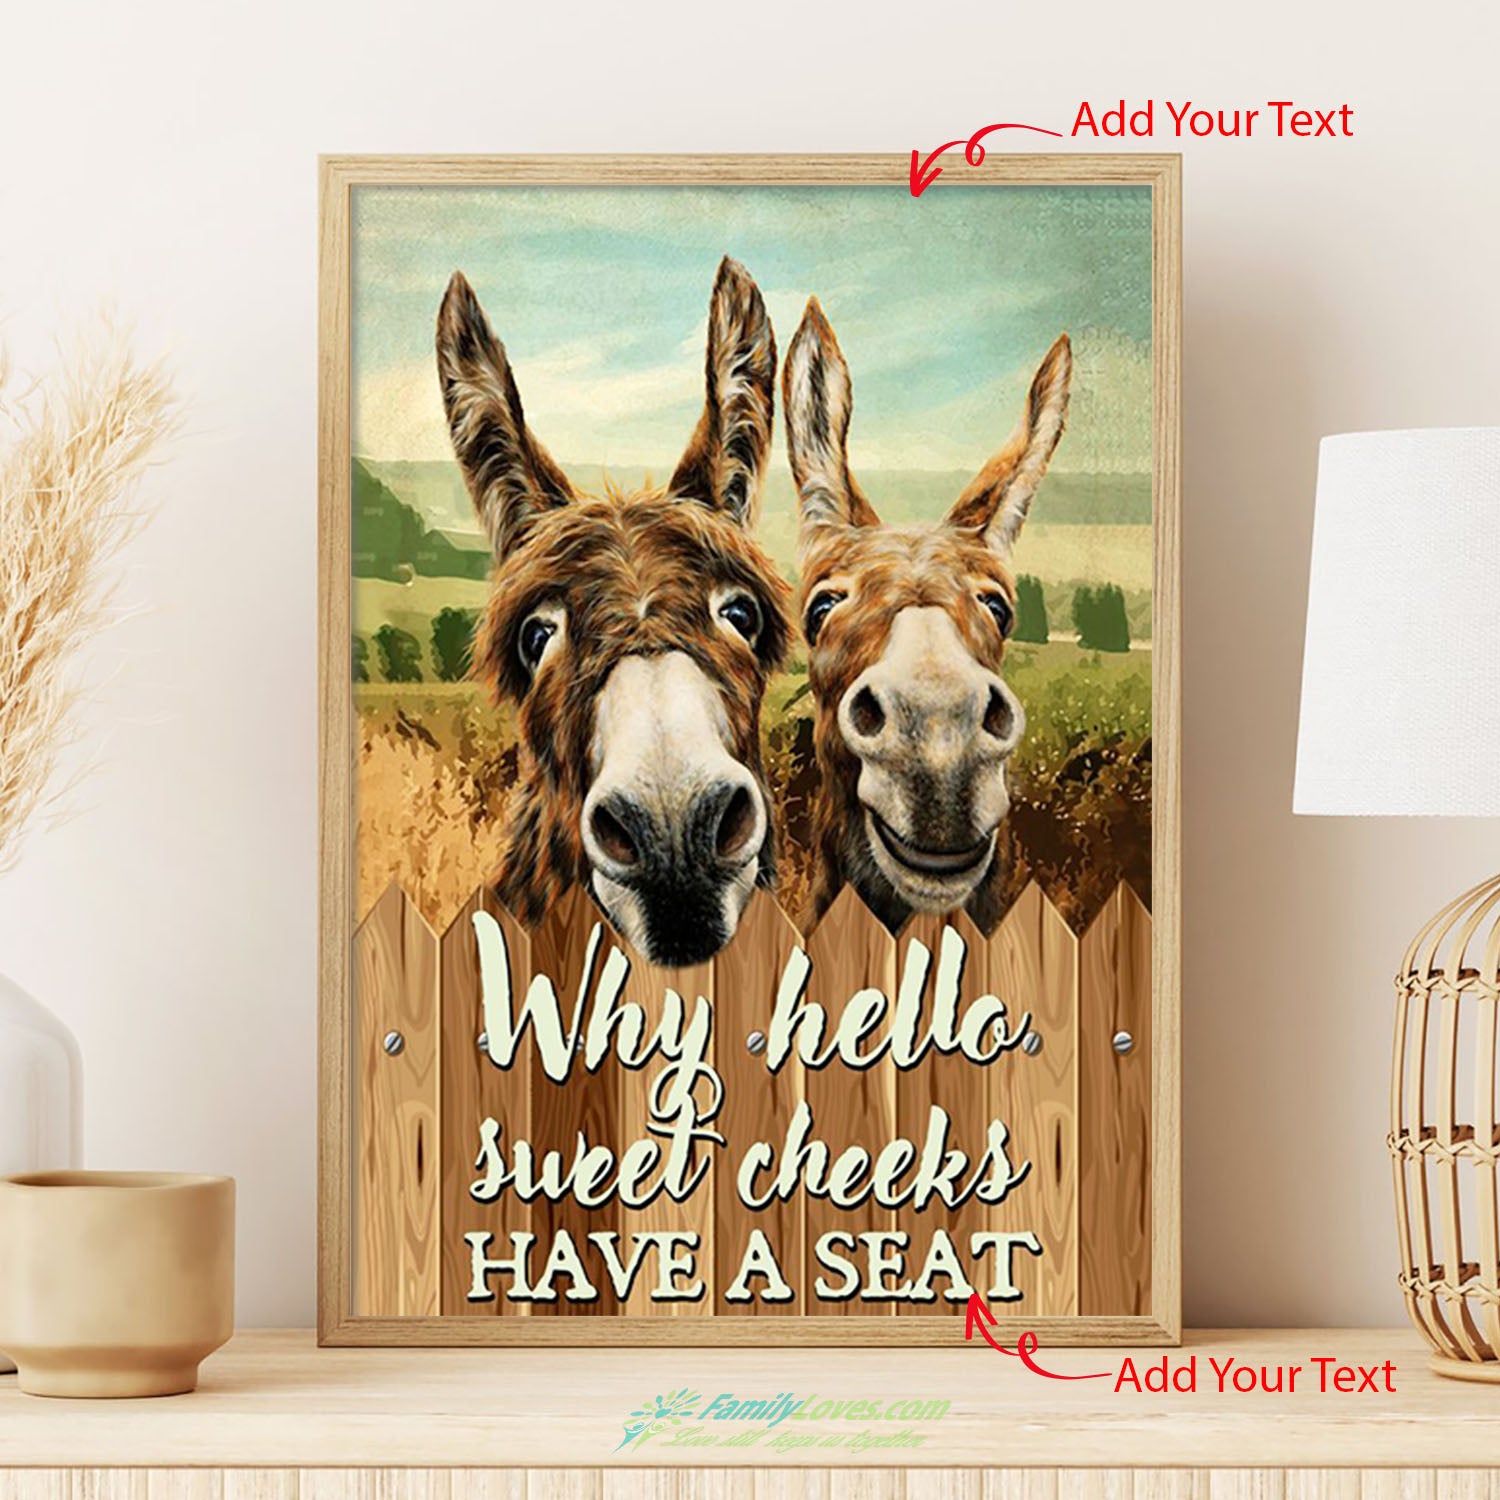 Why Hello Sweet Cheeks Have A Seat Canvas 36 X 48 Poster Display All Size 1